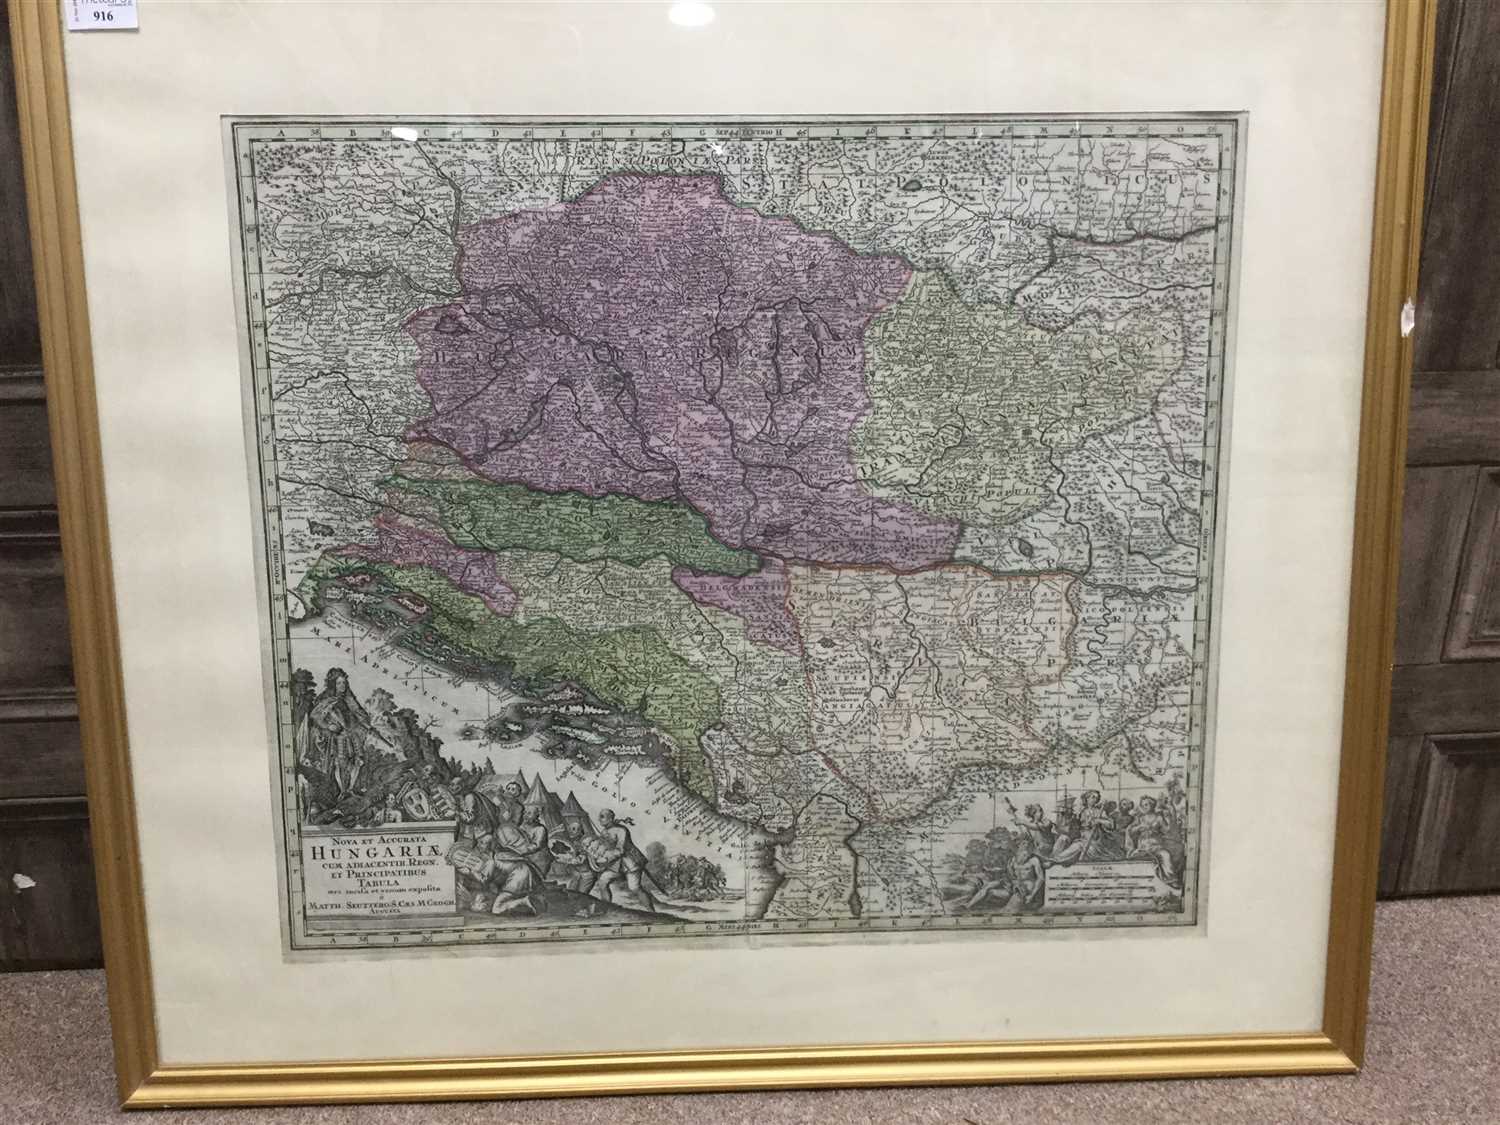 Lot 916 - MAP OF 'HUNGARIAE', AN ENGRAVING BY GEORGE MATTHAUS SEUTTER